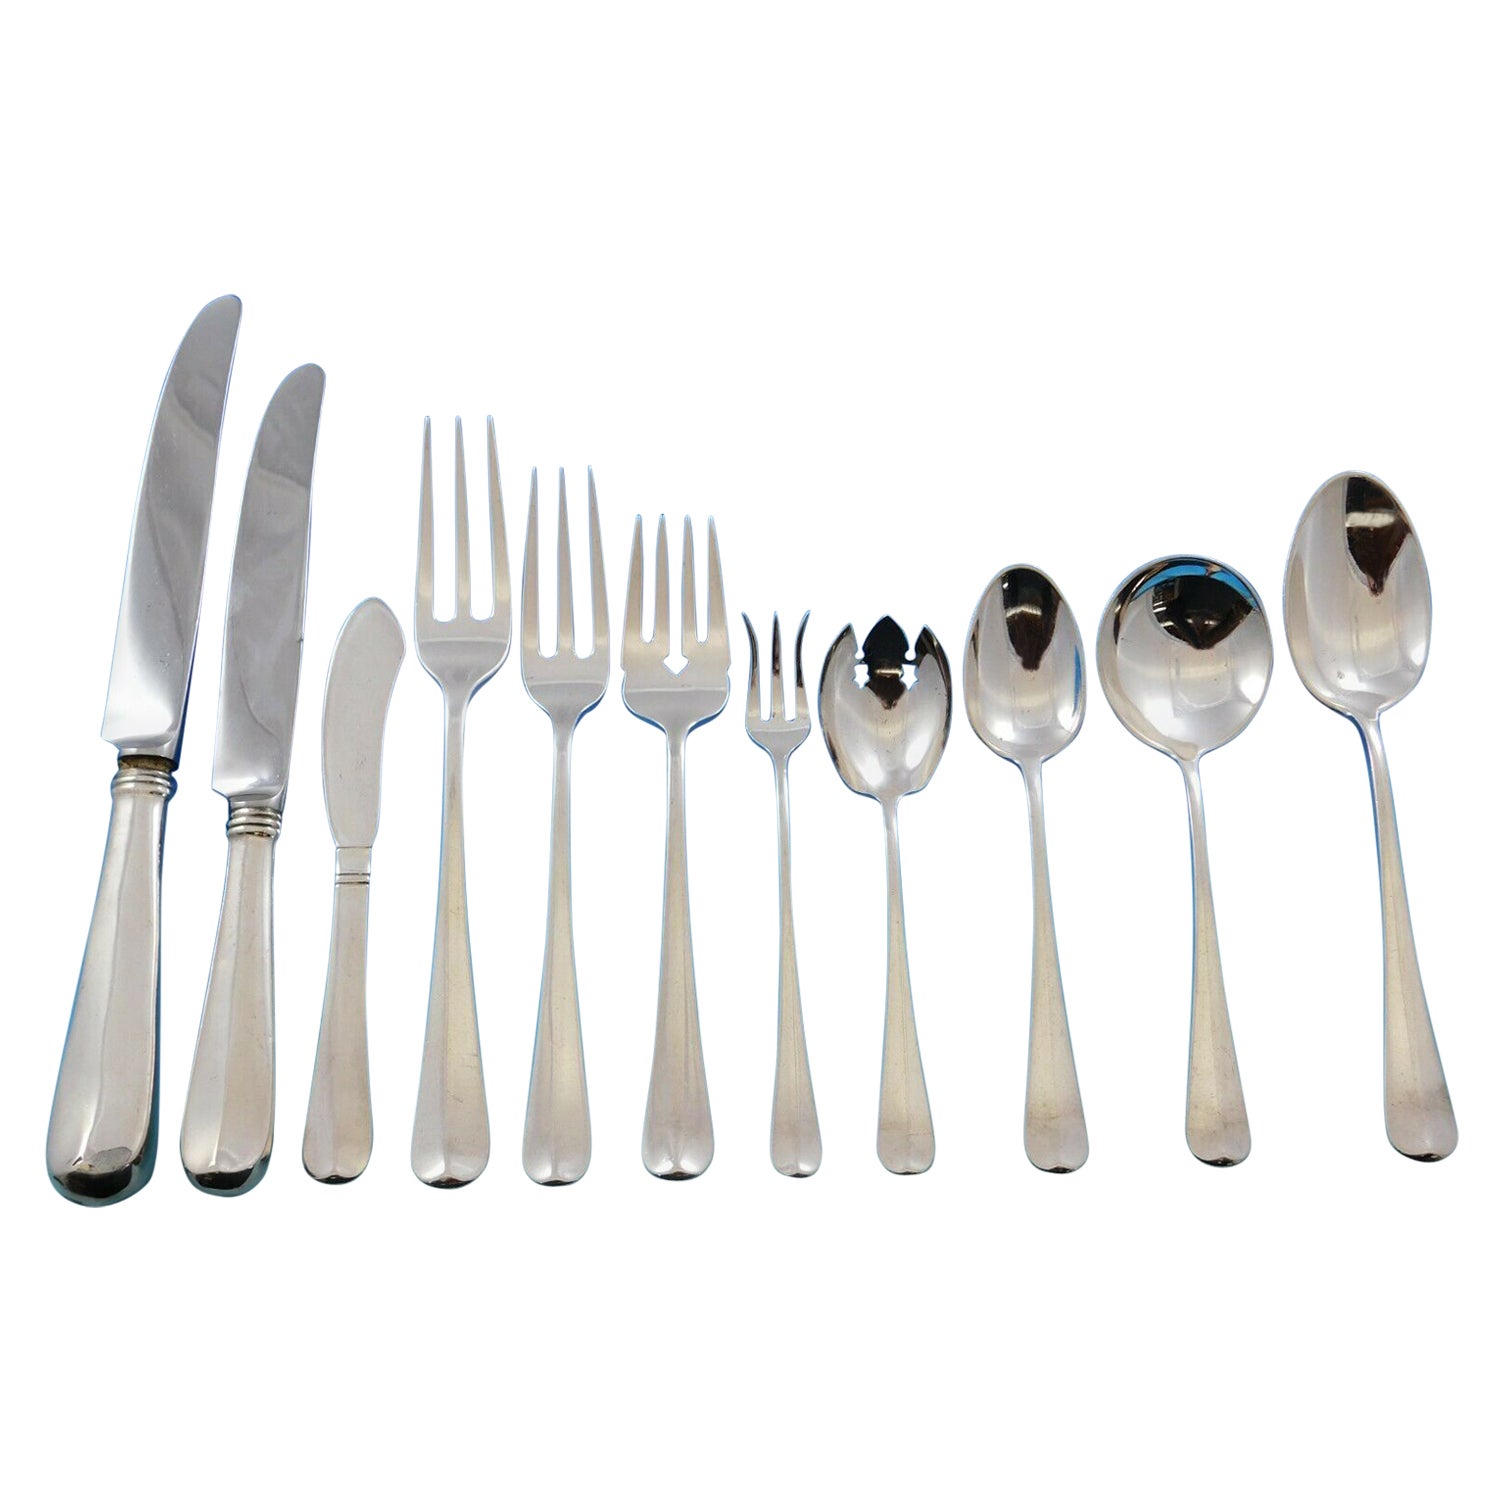 Dominick & Haff Rococo Butter Spreader Flat Handle Details about   Sterling Silver Flatware 